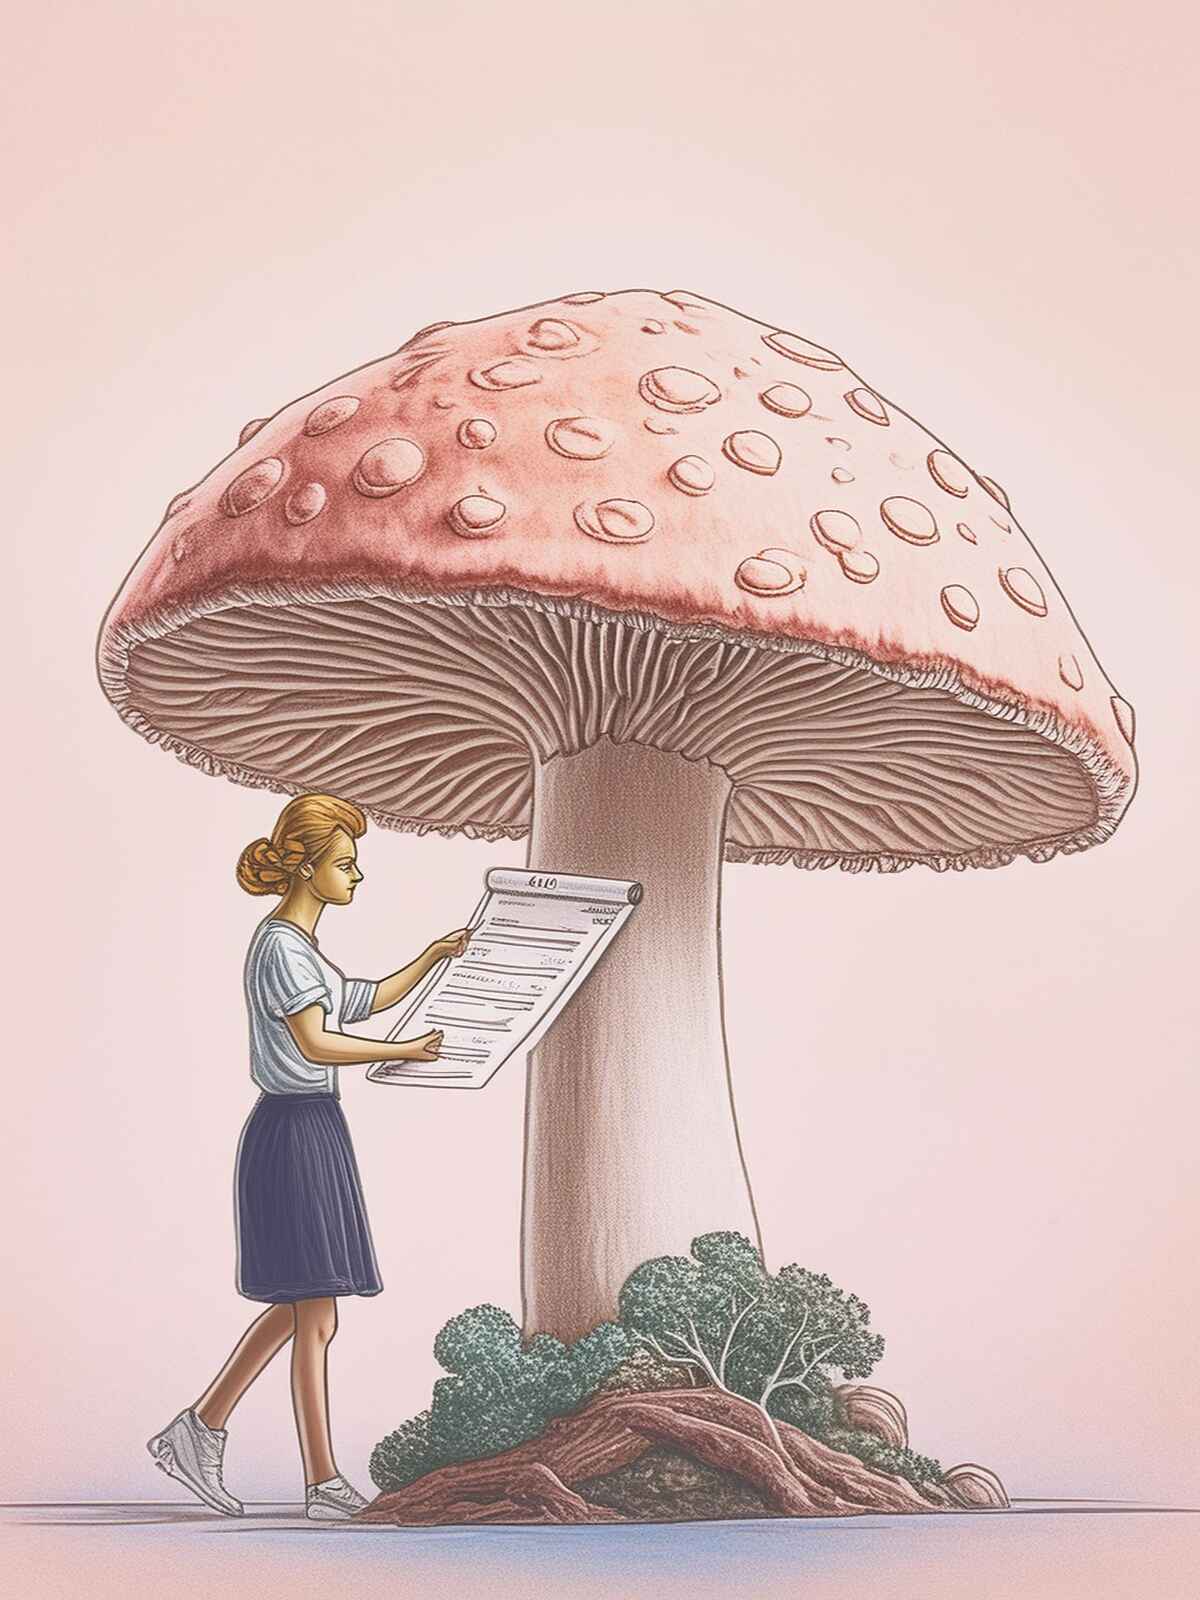 Drawing of a person adding a prize certificate to a mushroom, symbolizing the award-winning quality of our mushroom products.